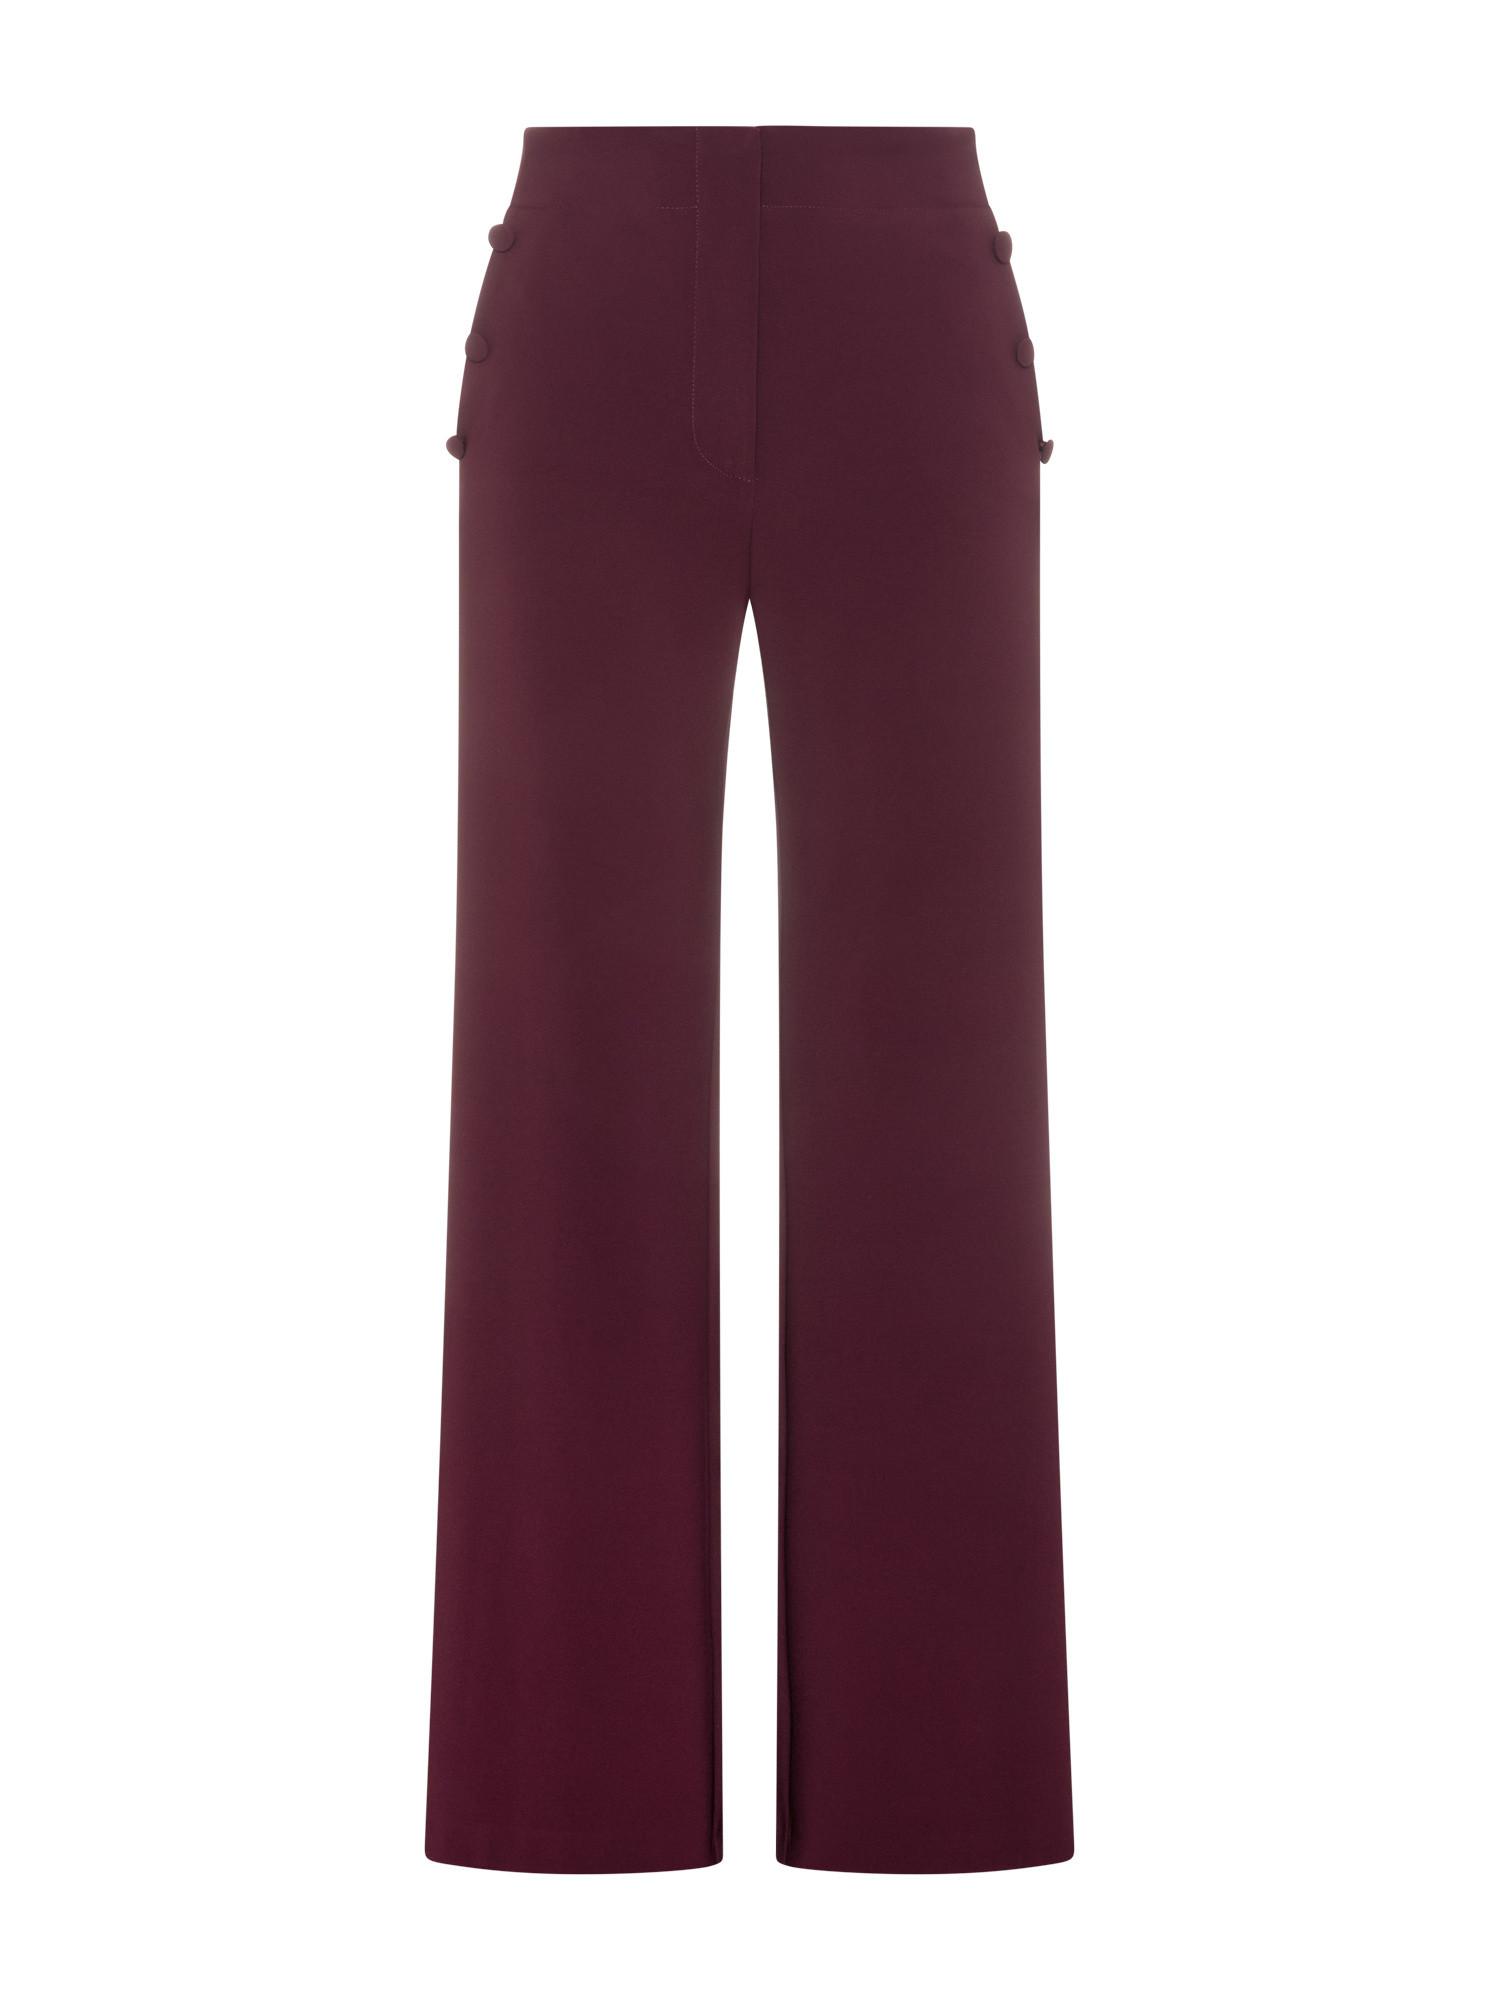 Koan - Wide leg trousers, Red Bordeaux, large image number 0